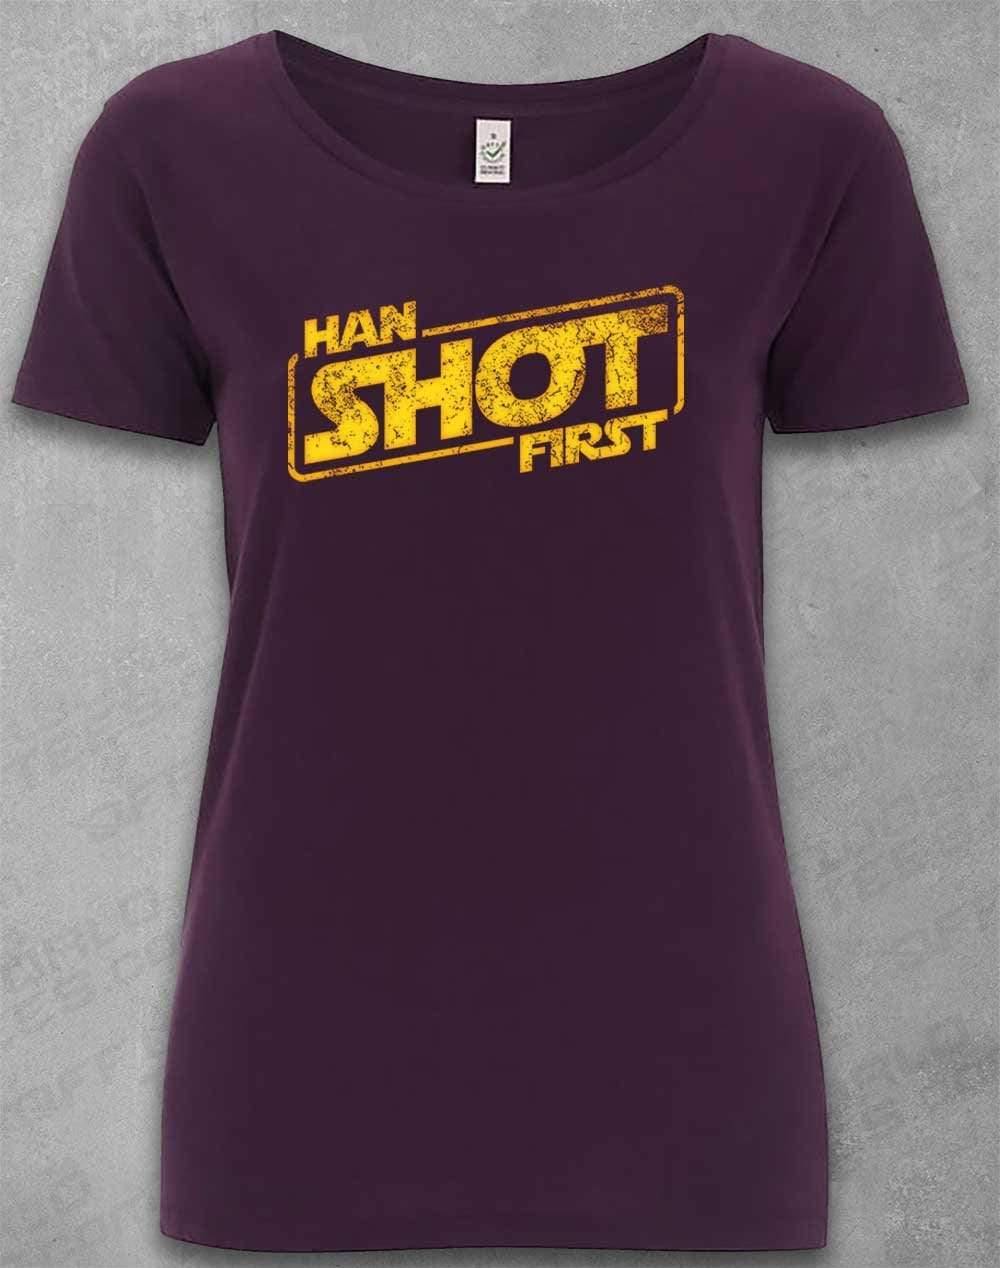 DELUXE Han Shot First - Organic Scoop Neck T-Shirt 8-10 / Eggplant  - Off World Tees